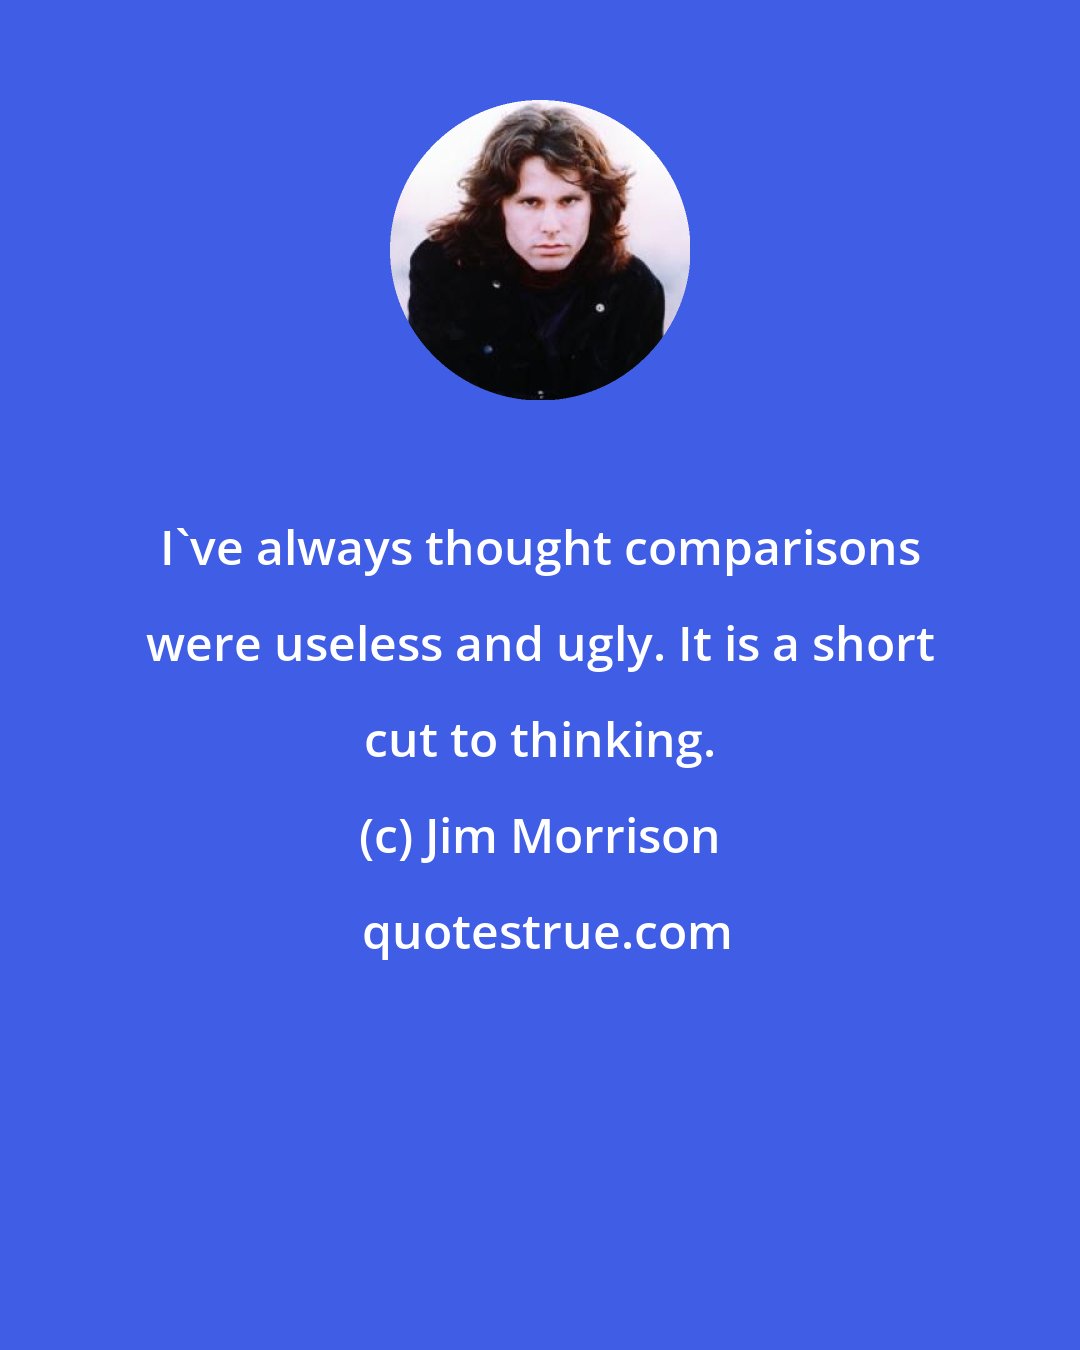 Jim Morrison: I've always thought comparisons were useless and ugly. It is a short cut to thinking.